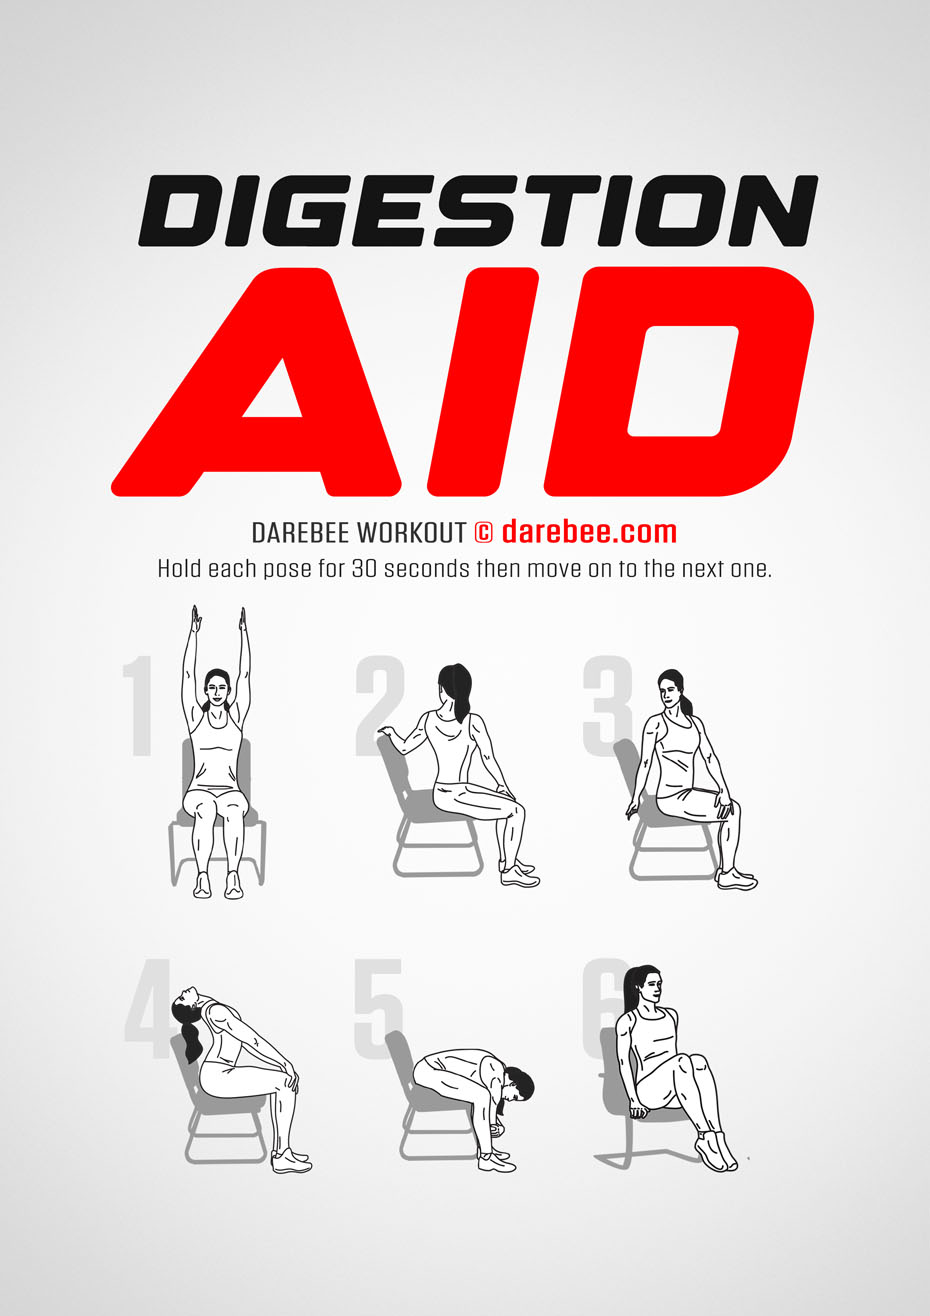 Digestion Aid is a Darebee home fitness, no-equipment workout you can do any time, anywhere, that will help you feel good about your self. 